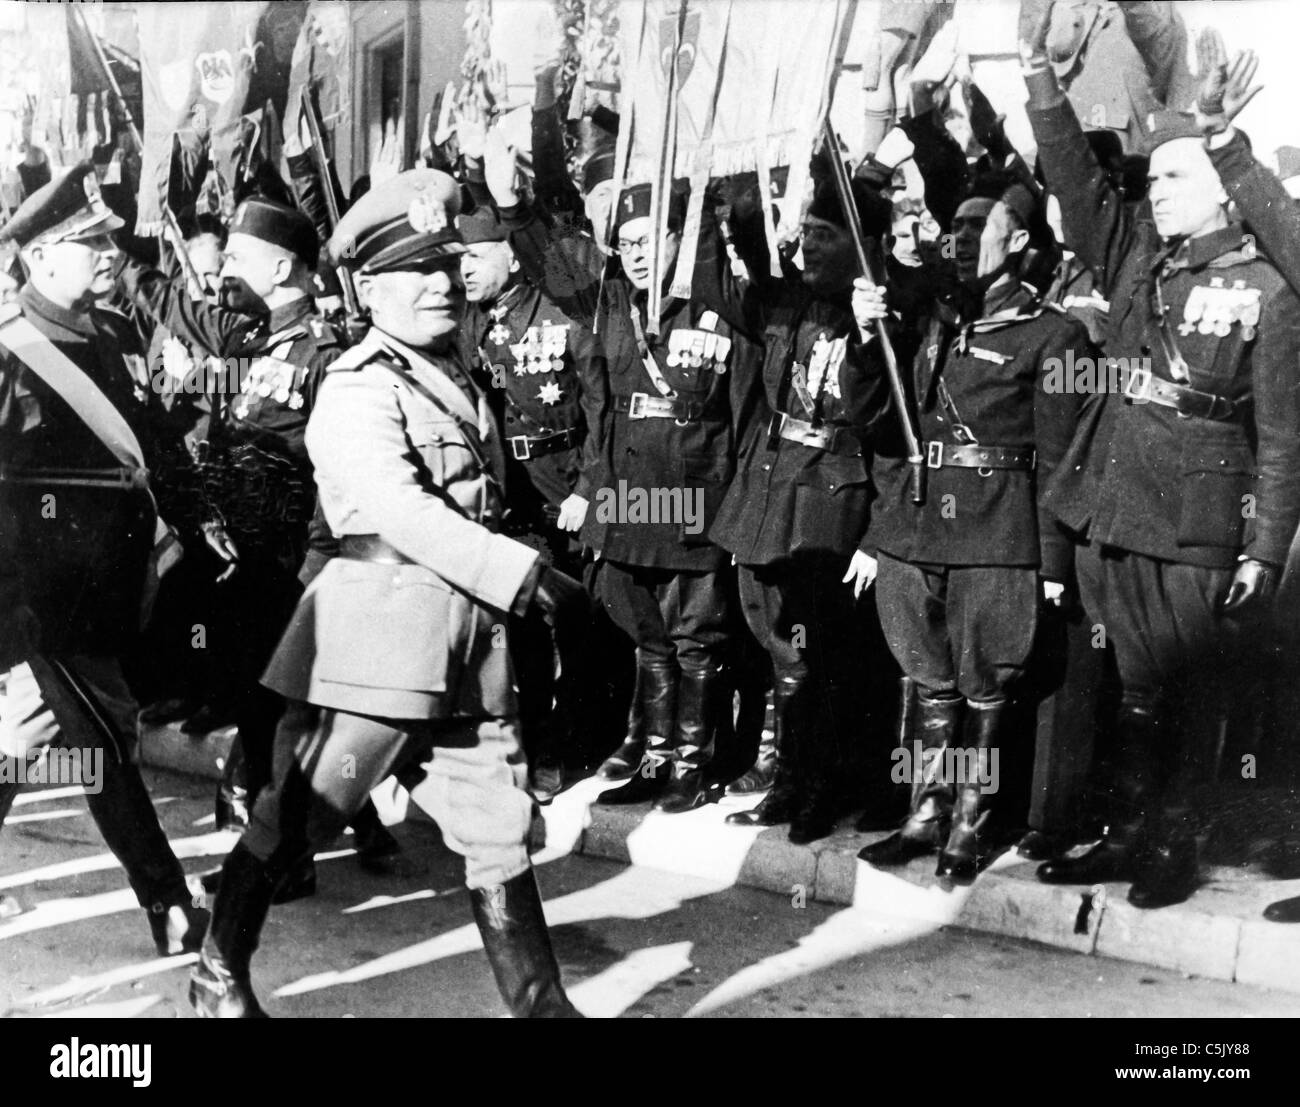 Benito Mussolini parade in front of his loyalists, 1940 Stock Photo